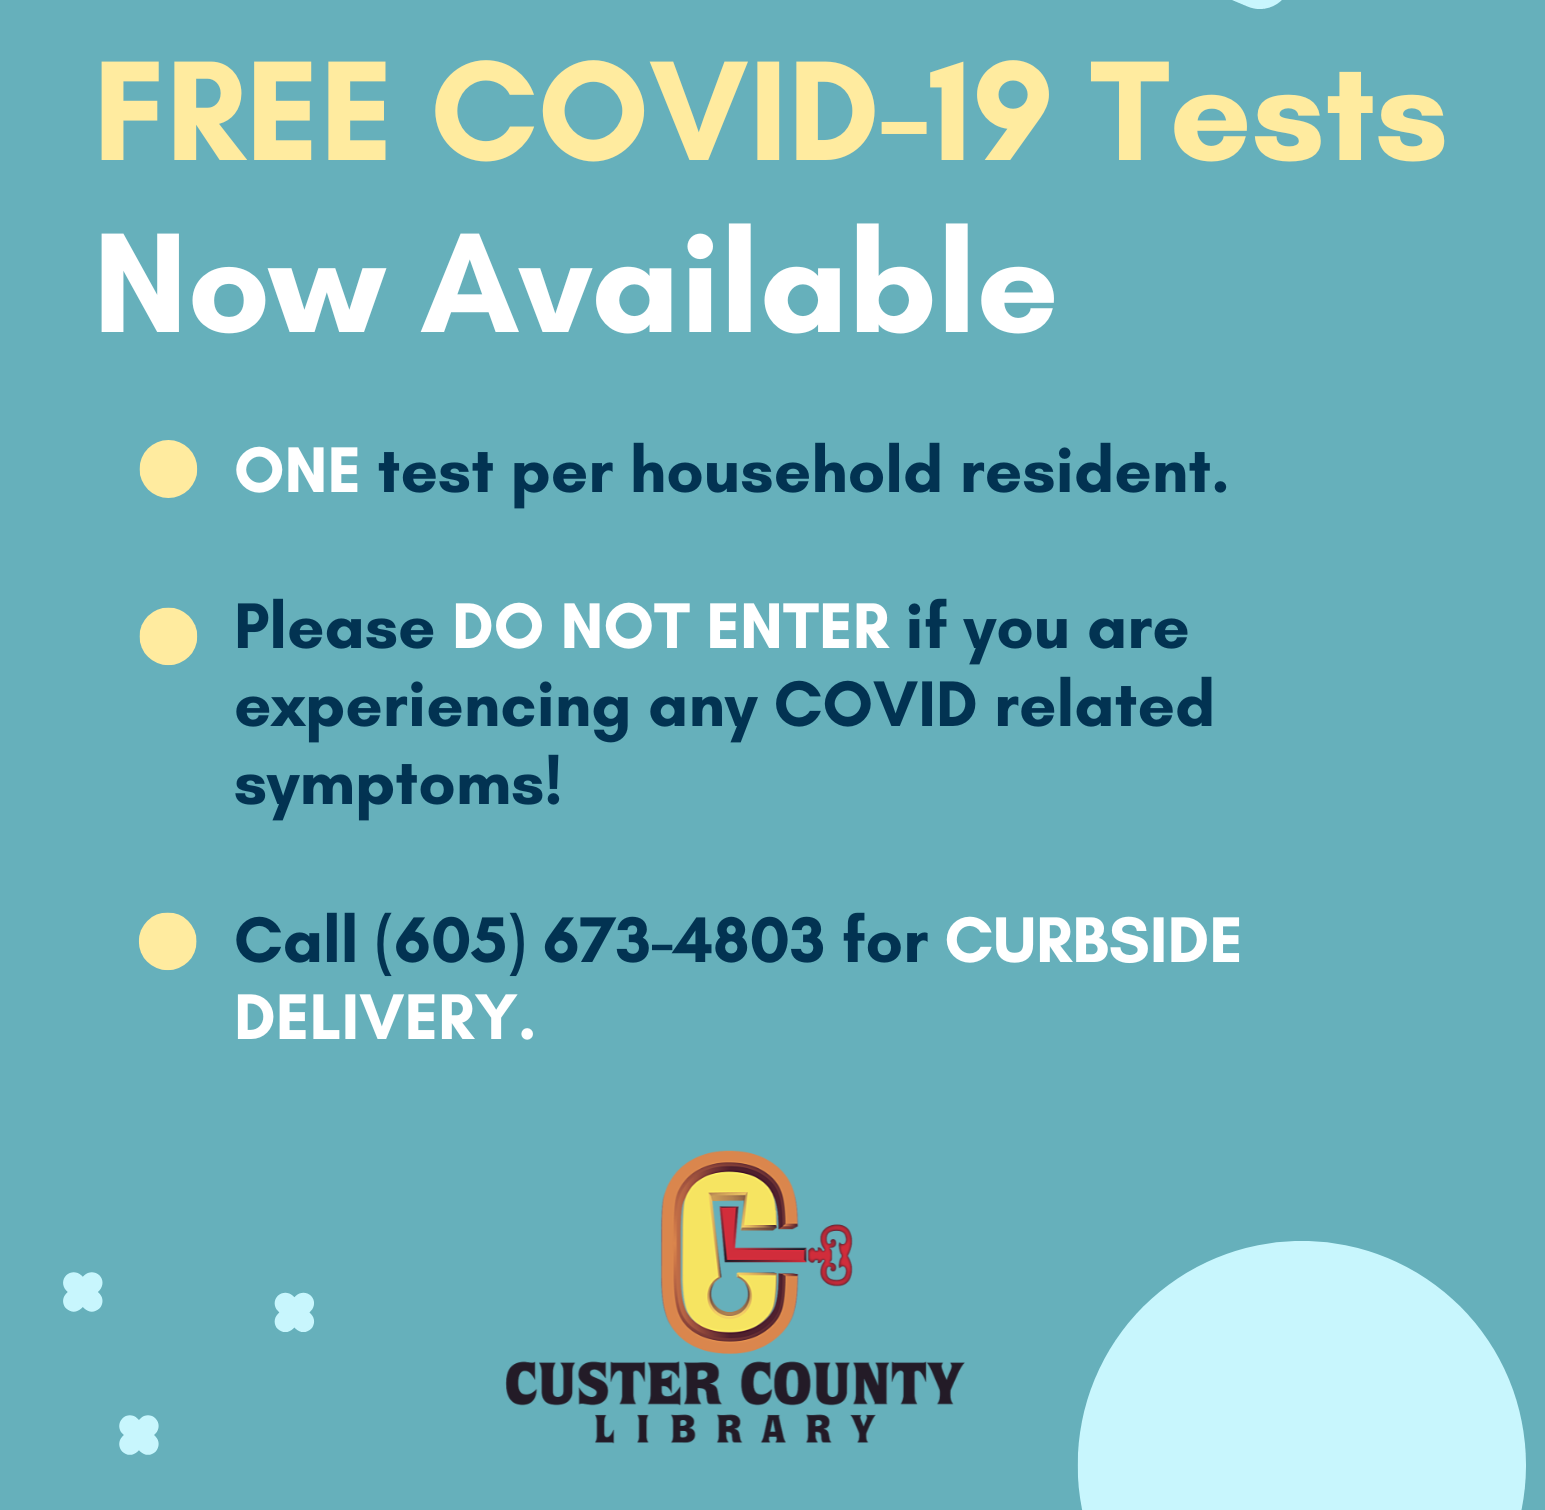 Visit the Library, grab a Covid Test